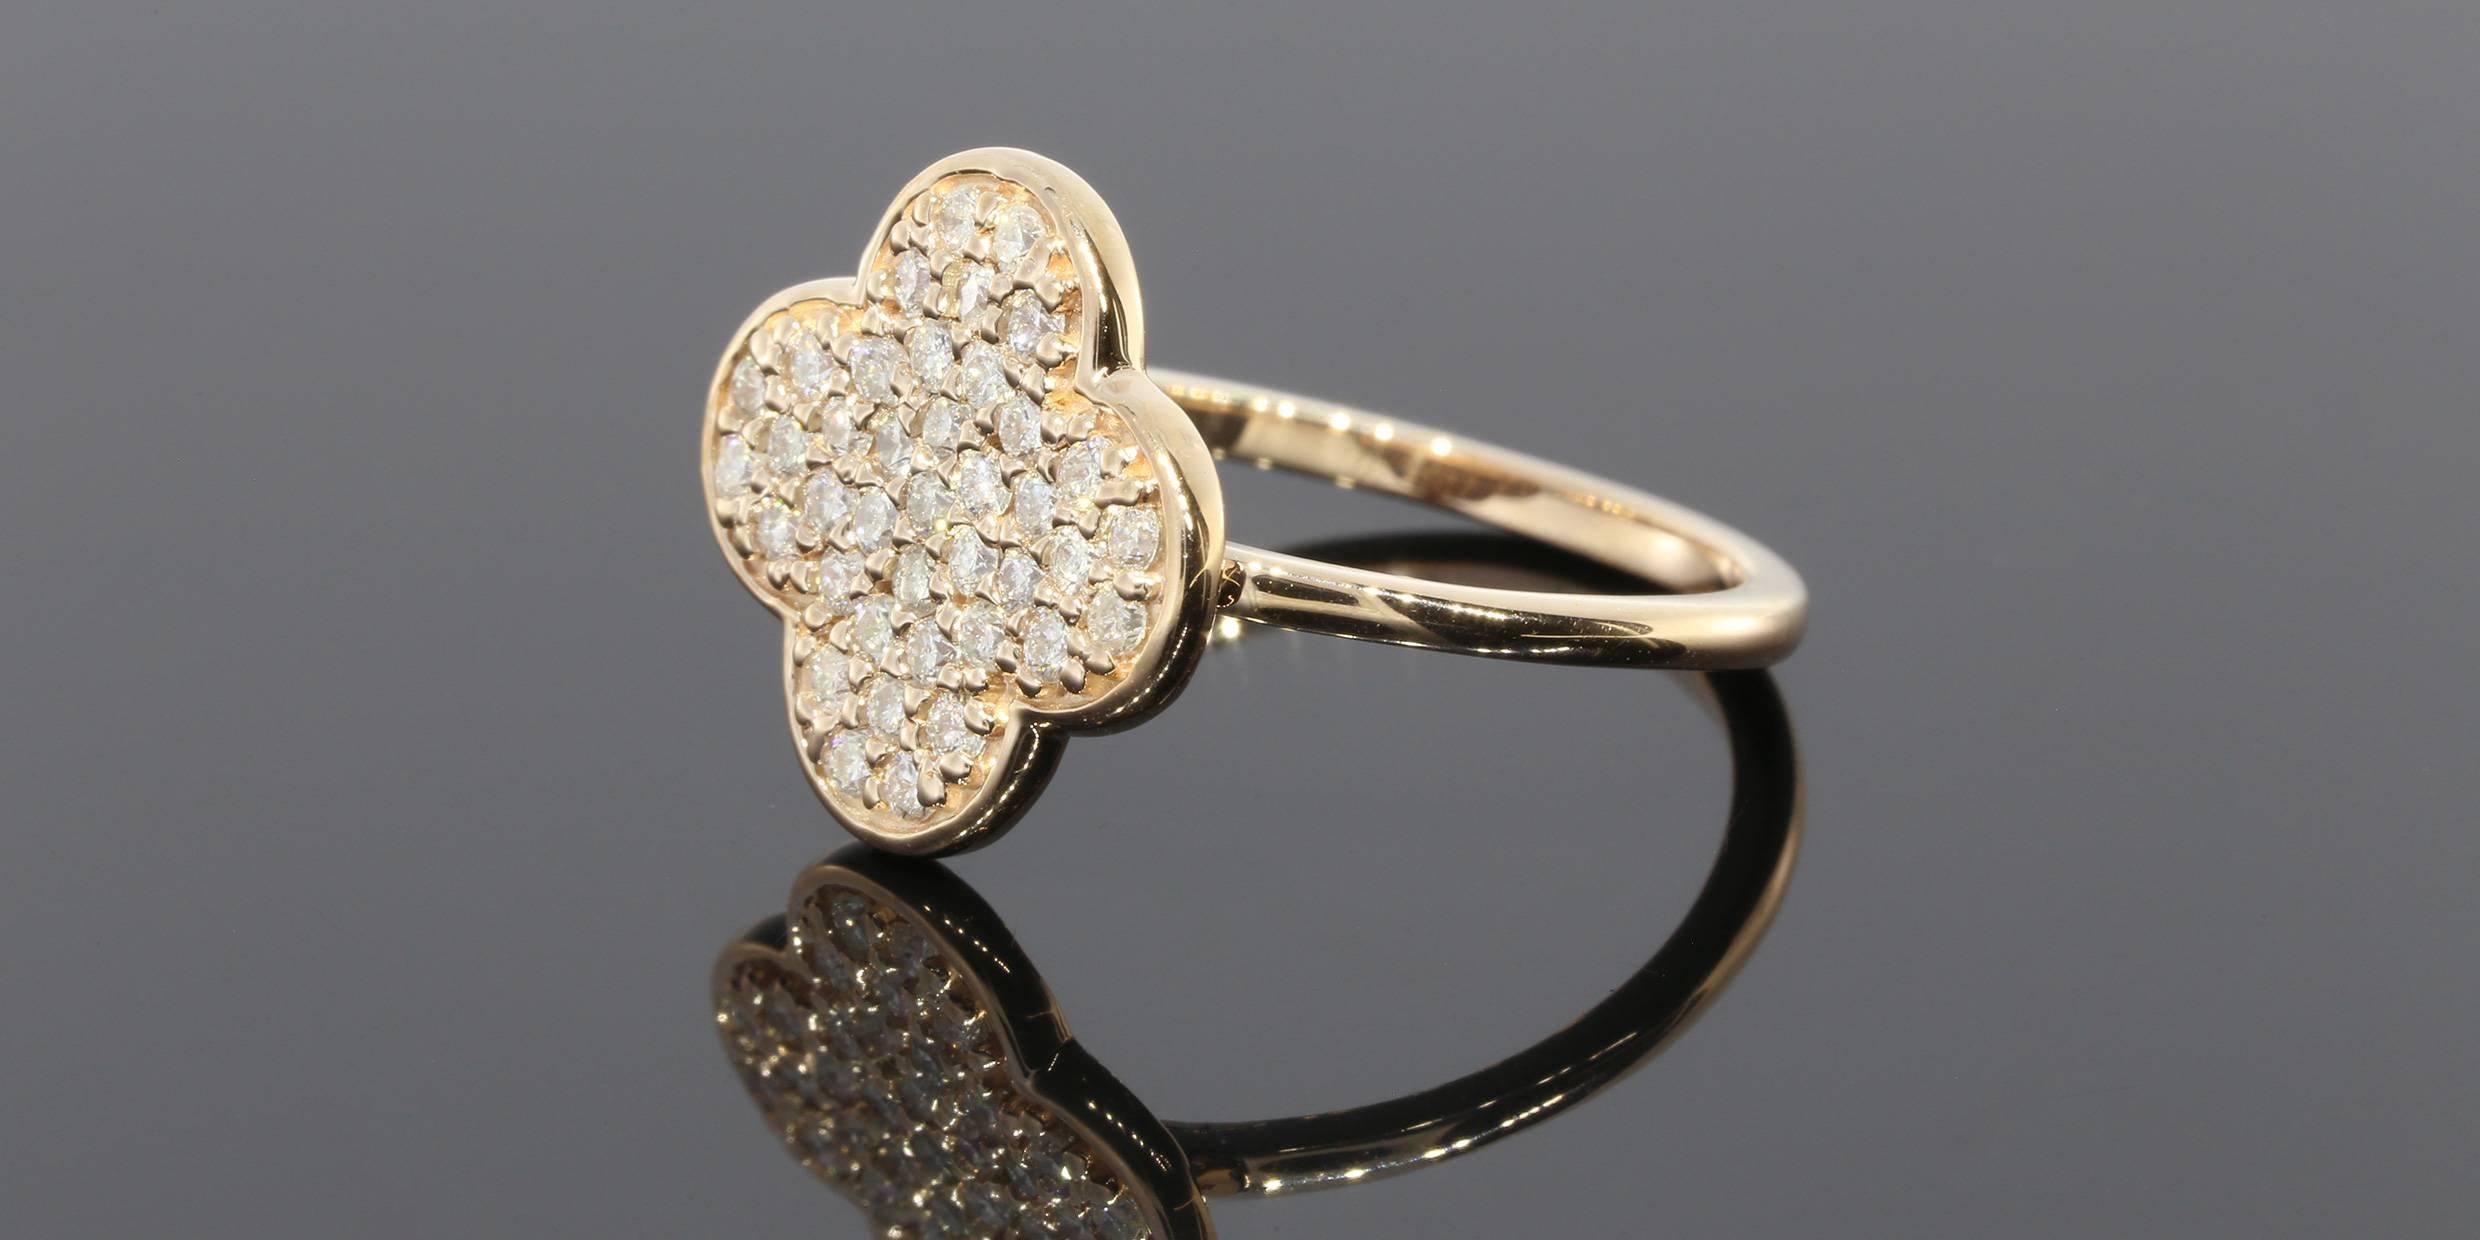 This lovely ring features a beautiful clover design in trendy rose gold. The ring is pave set with sparkly round brilliant cut diamonds that have a combined total weight of .35 carat & grade as GH/SI in quality. The ring is comprised of 14 karat